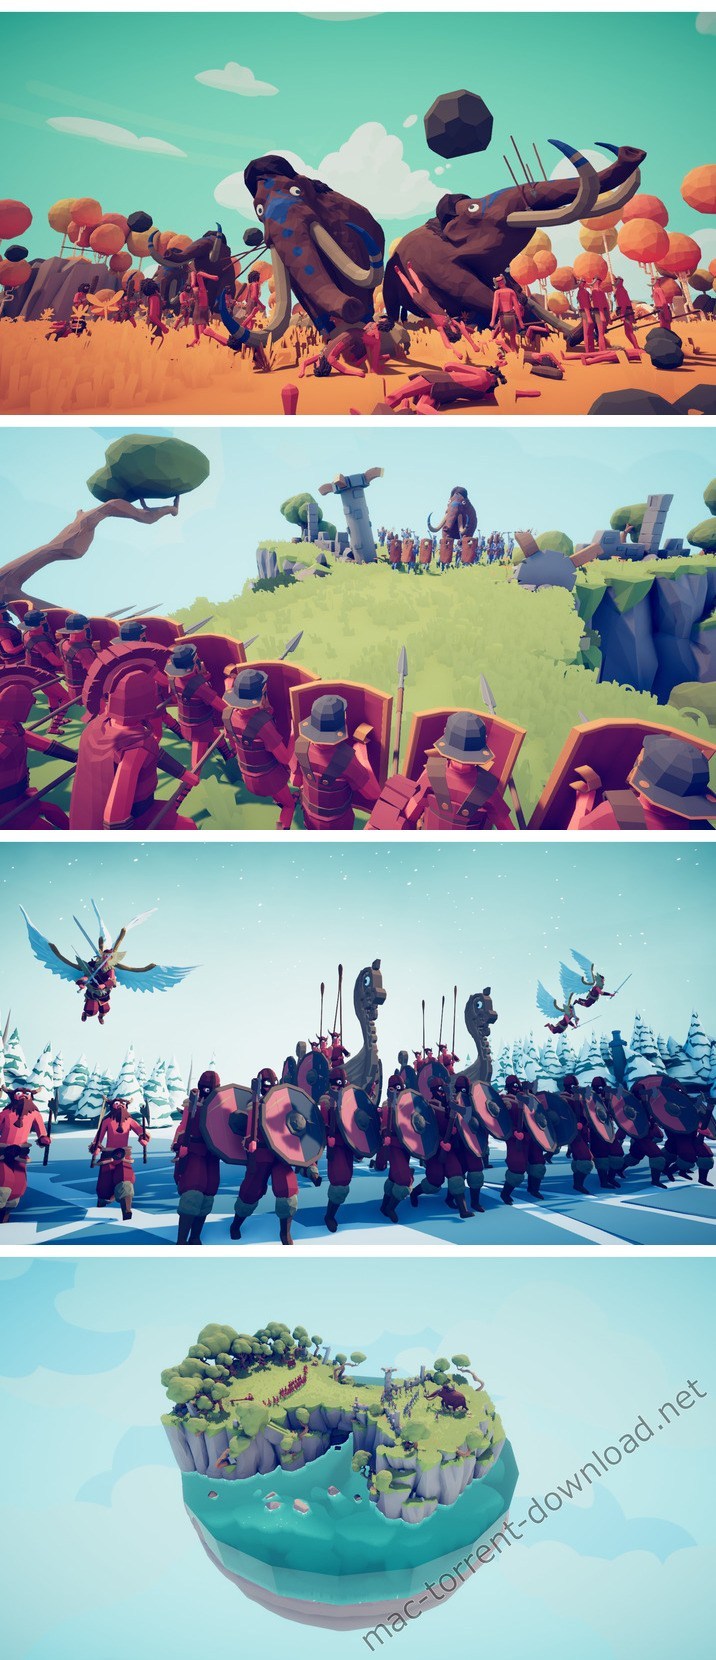 Totally accurate battle simulator download pc